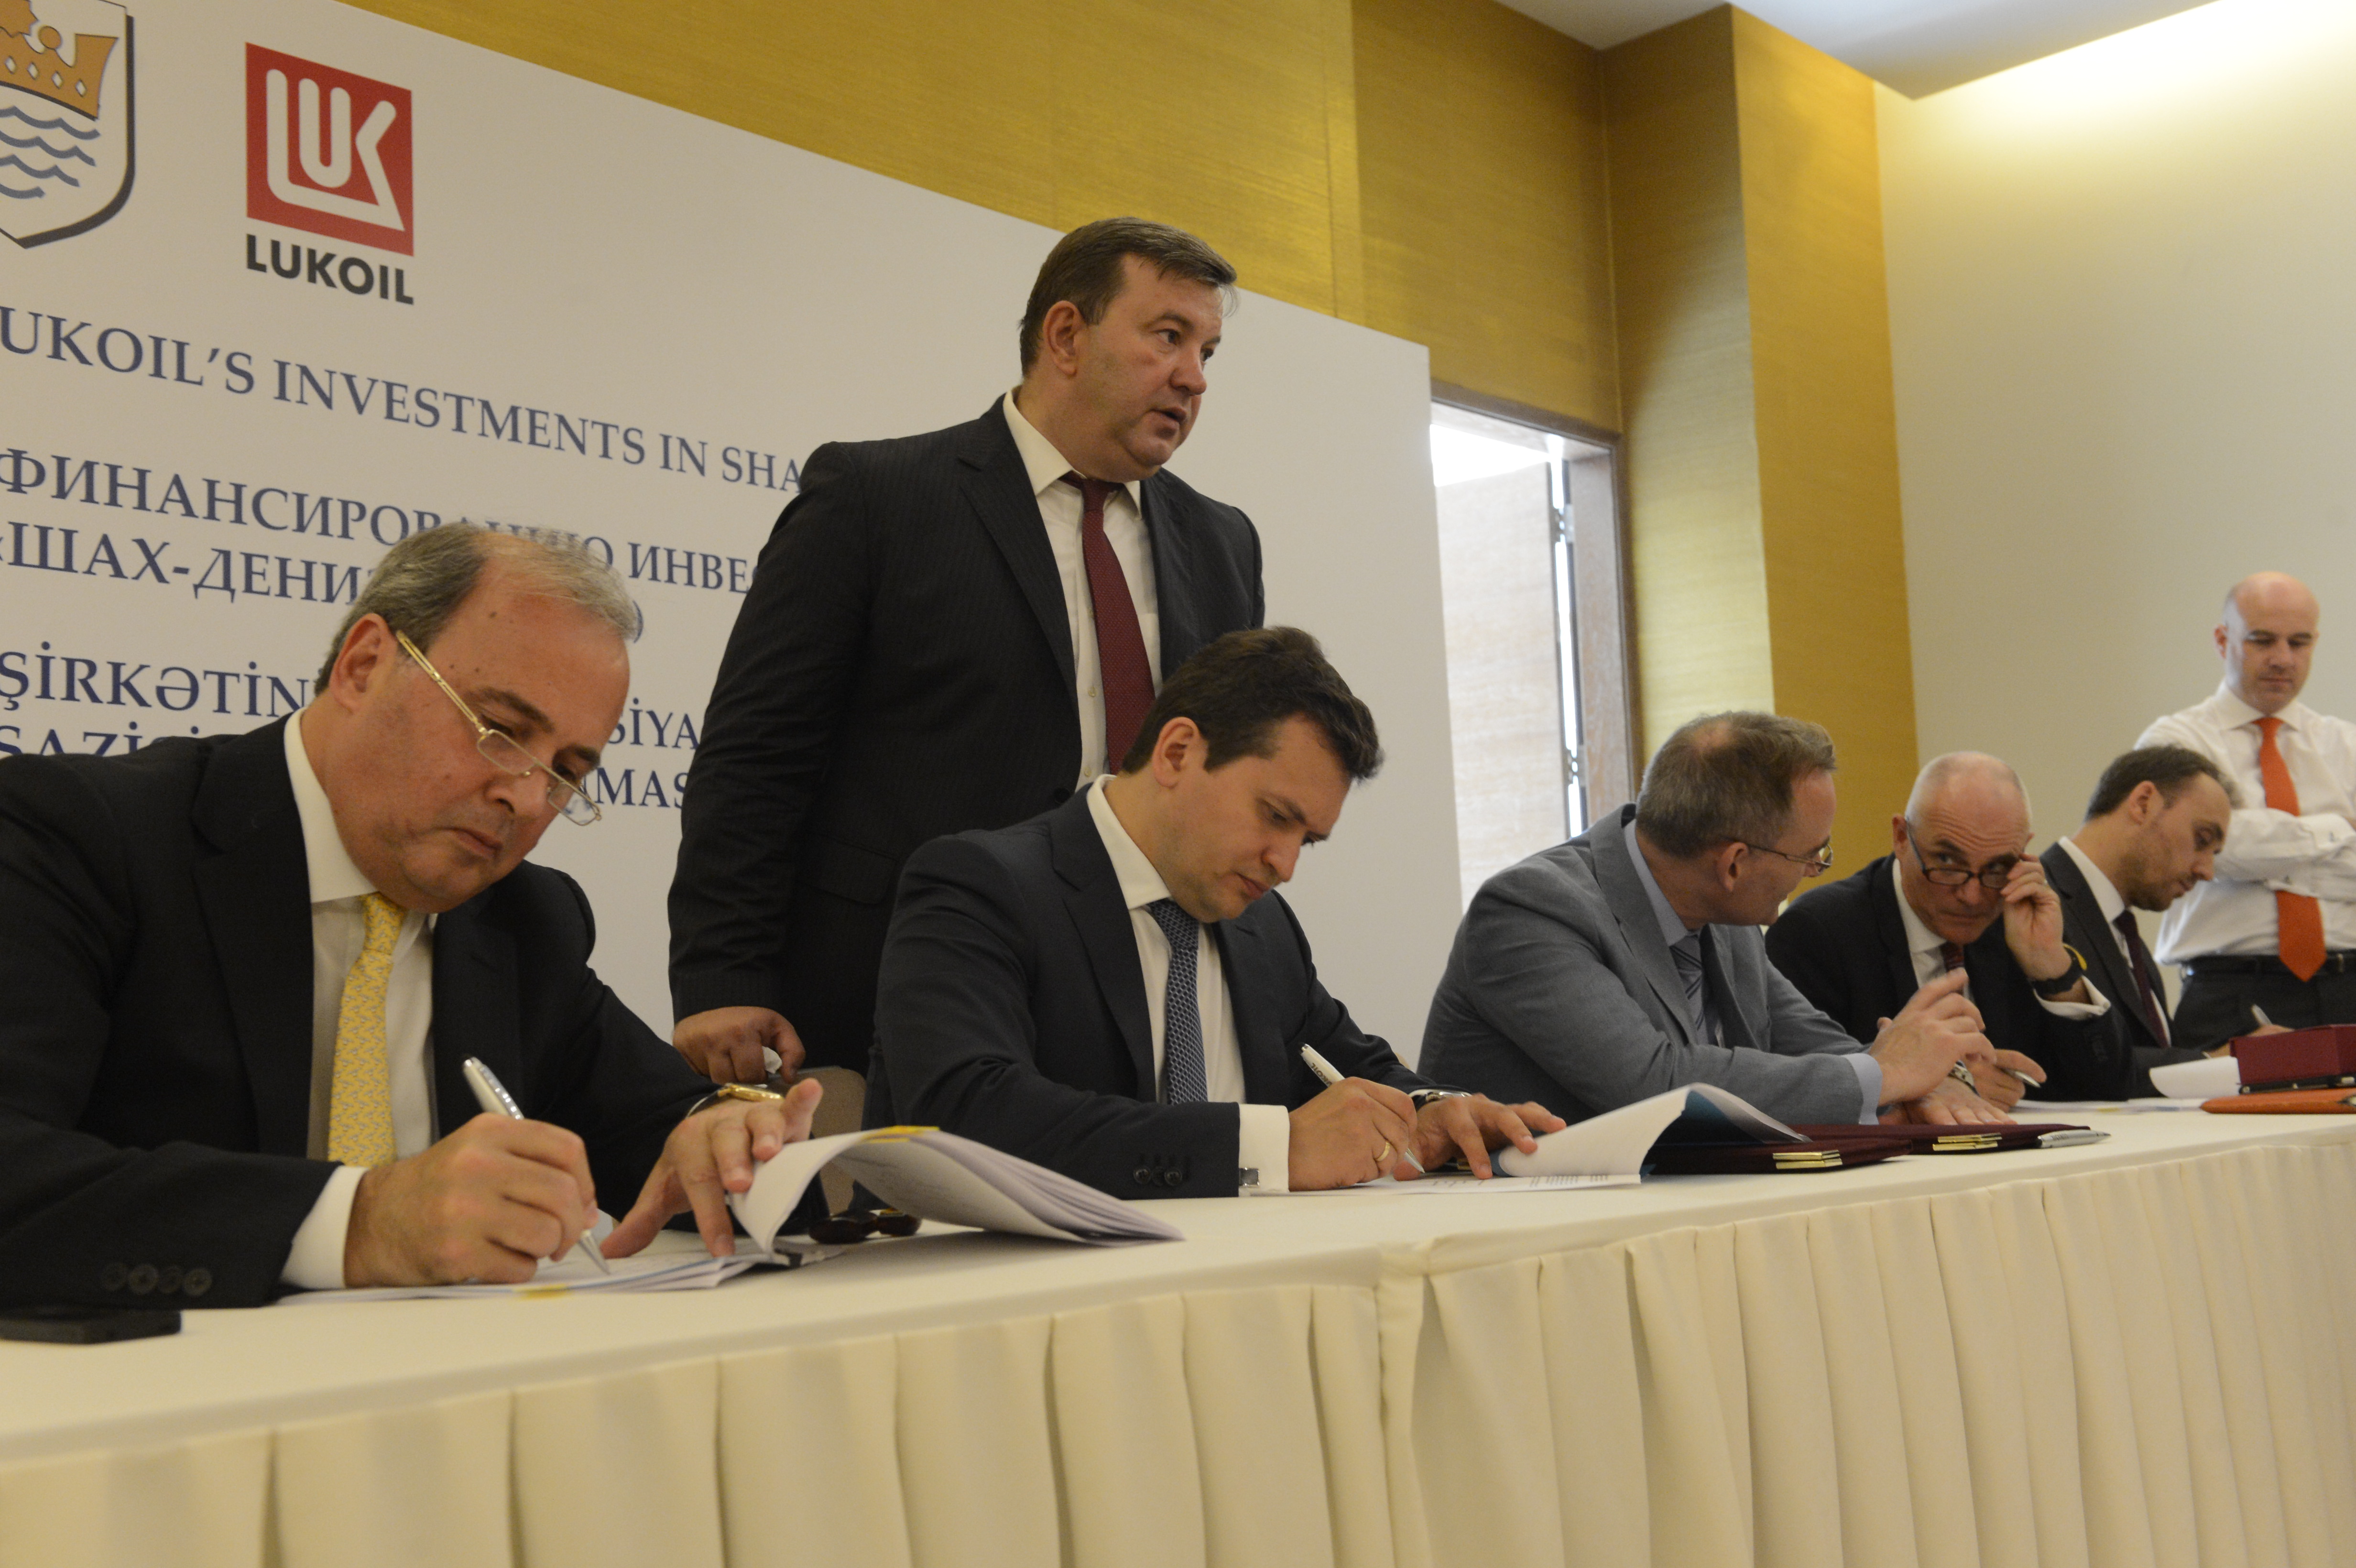 Lukoil gets financing for 2nd stage of Shah Deniz project